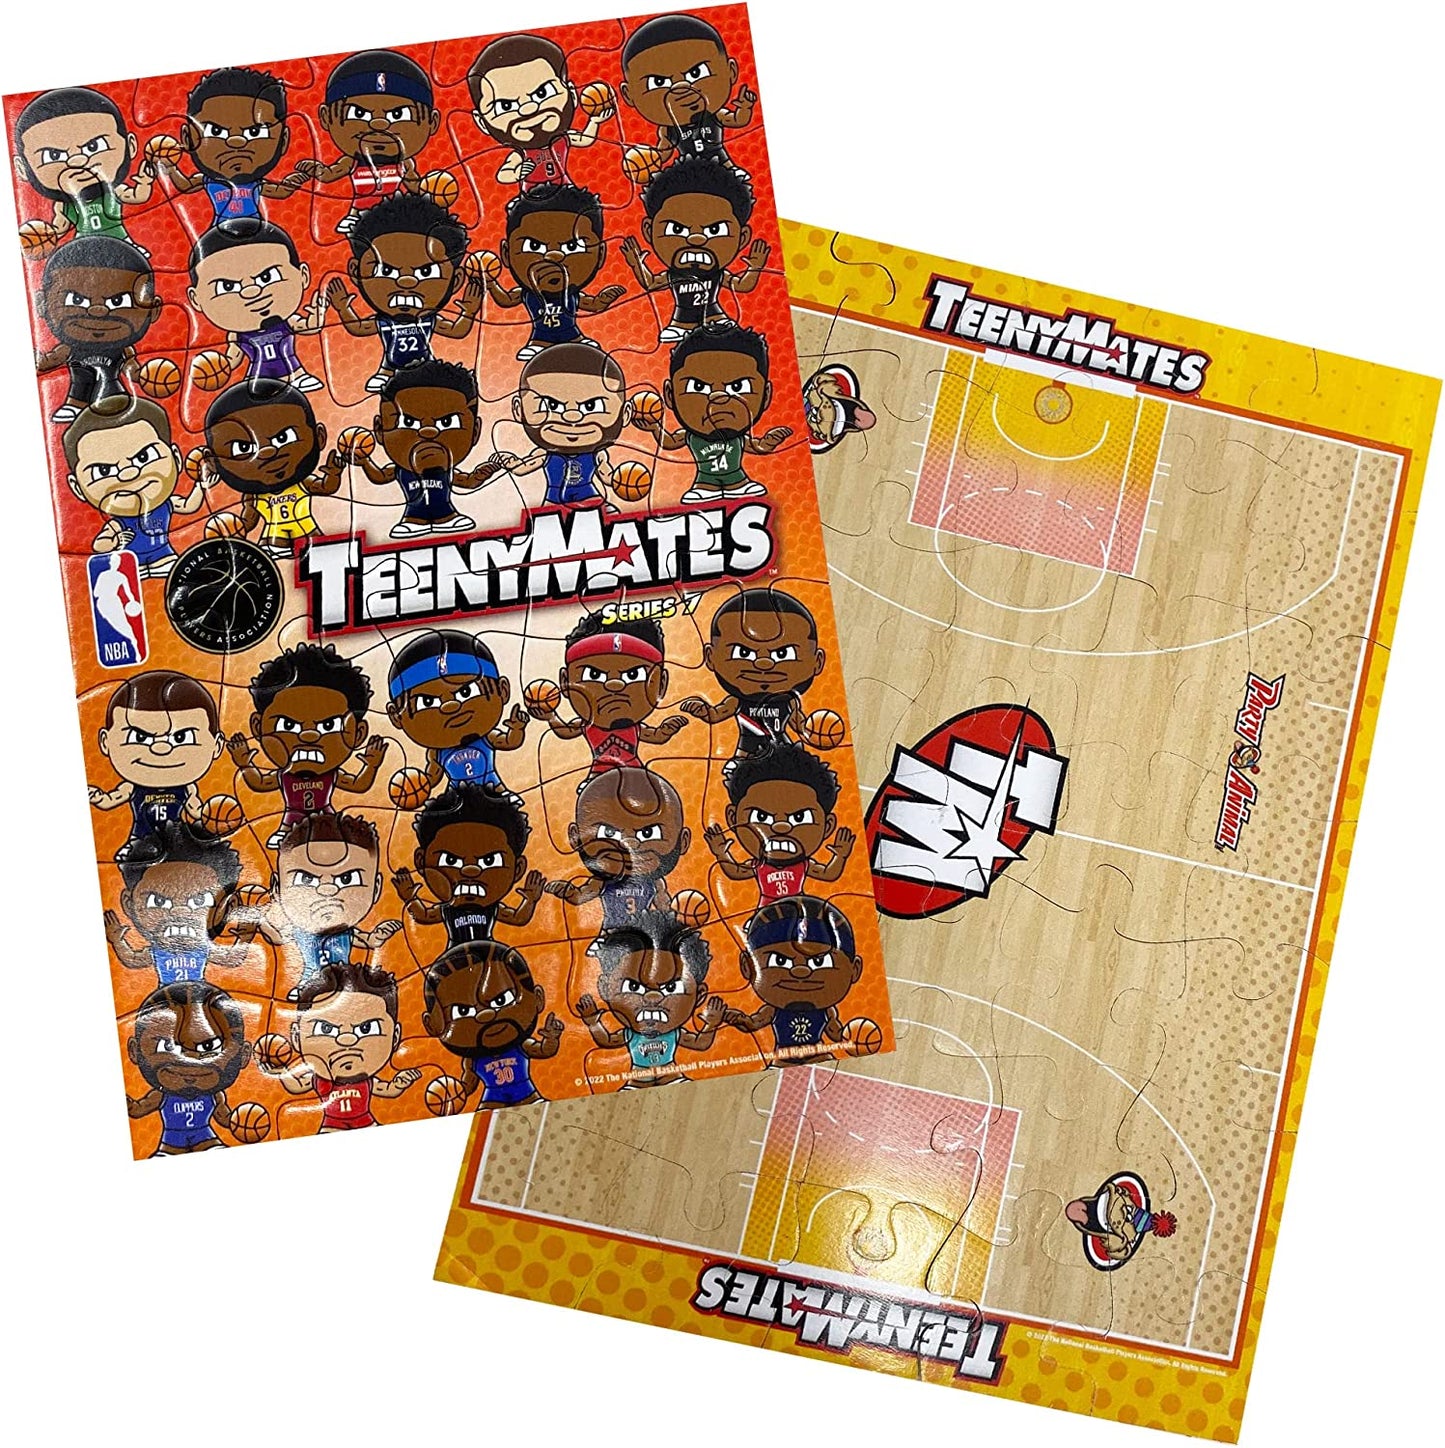 Party Animal TeenyMates 2021 - 2022 NBA Series 7 Mini Figures Blind Bags Gift Set Party Bundle - 4 Pack, Multicolored